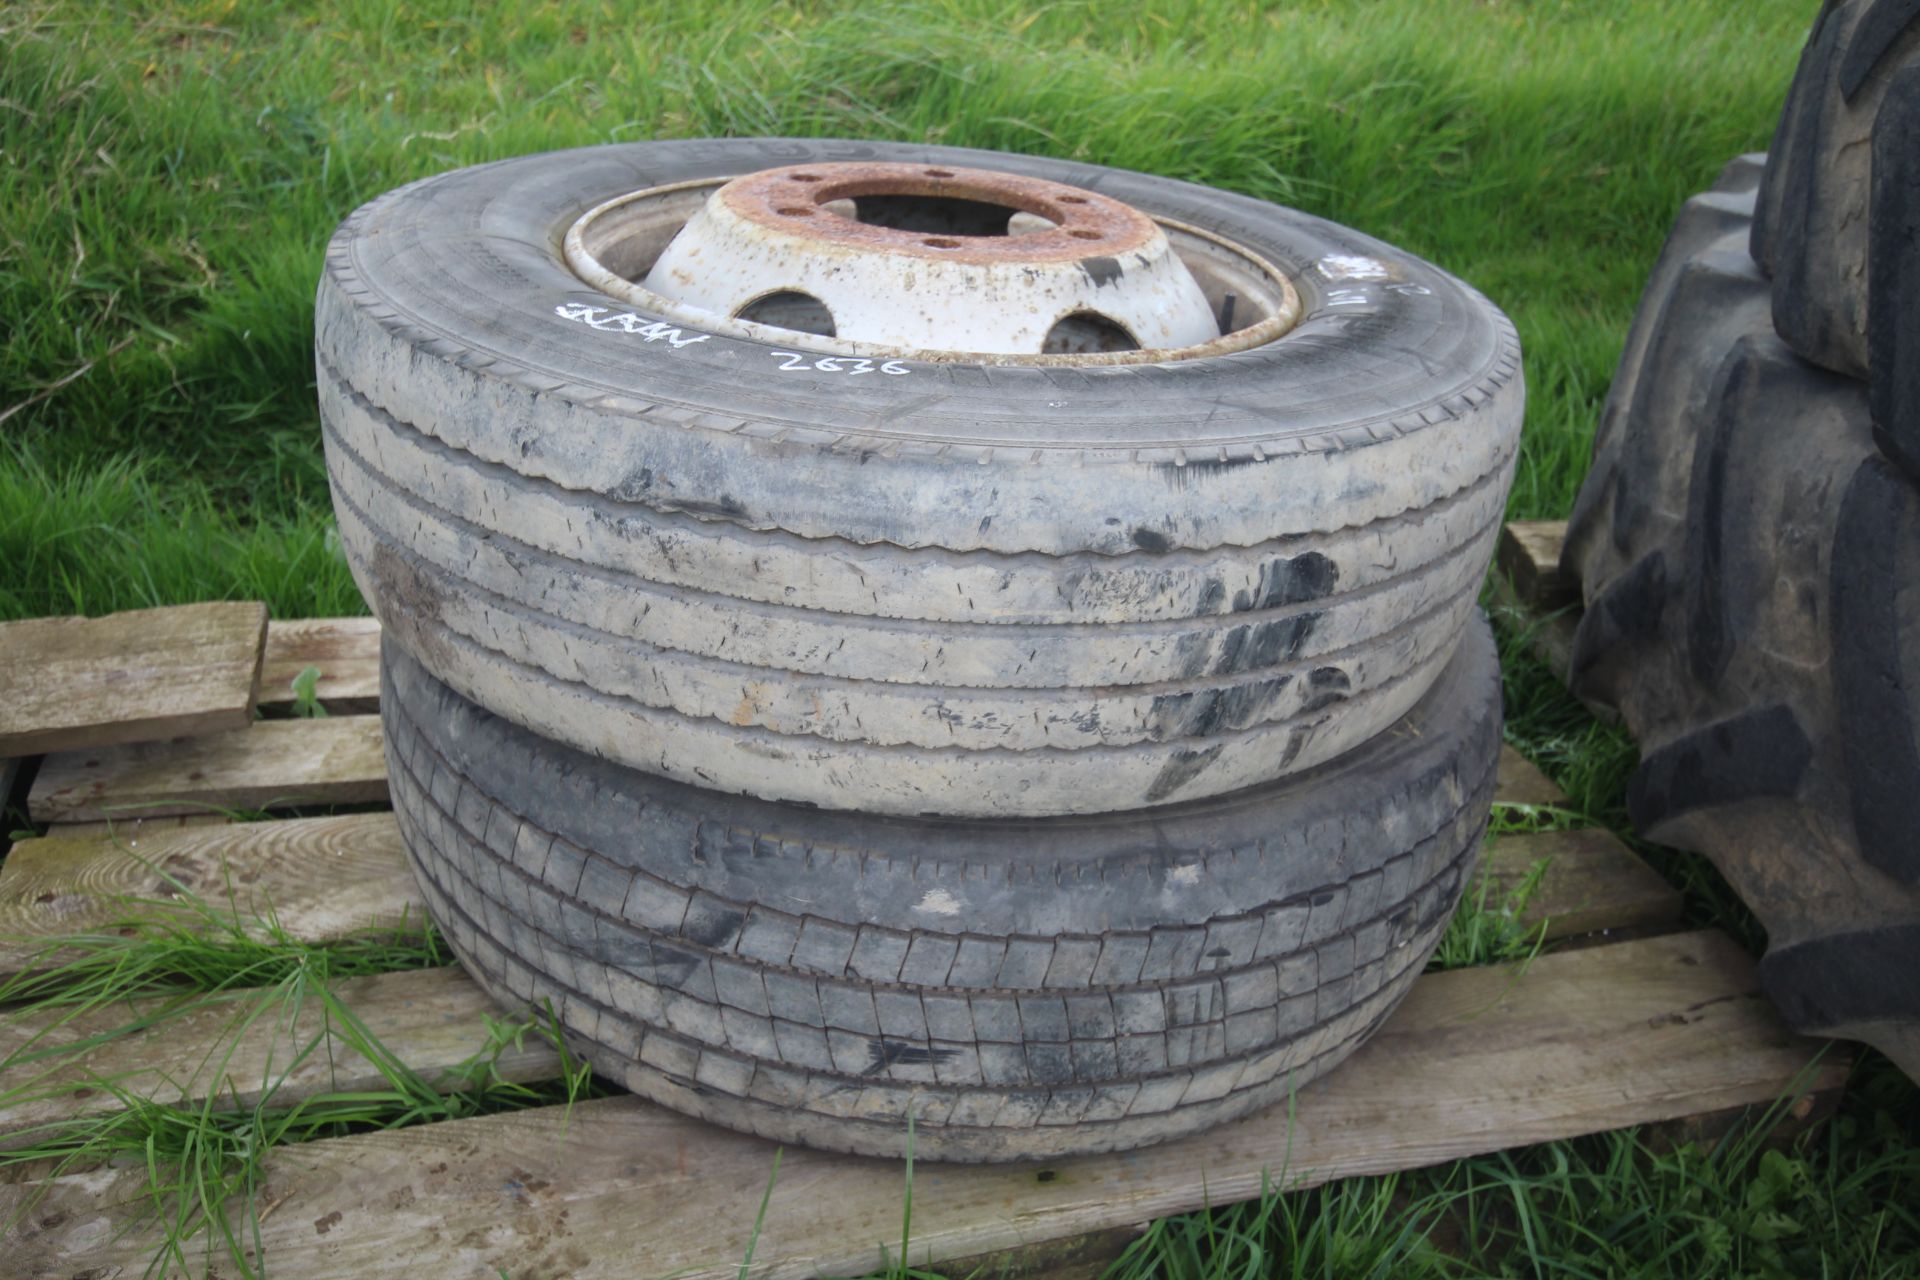 235/70R17.5 lorry wheel and tyre (requiring repair) and another.